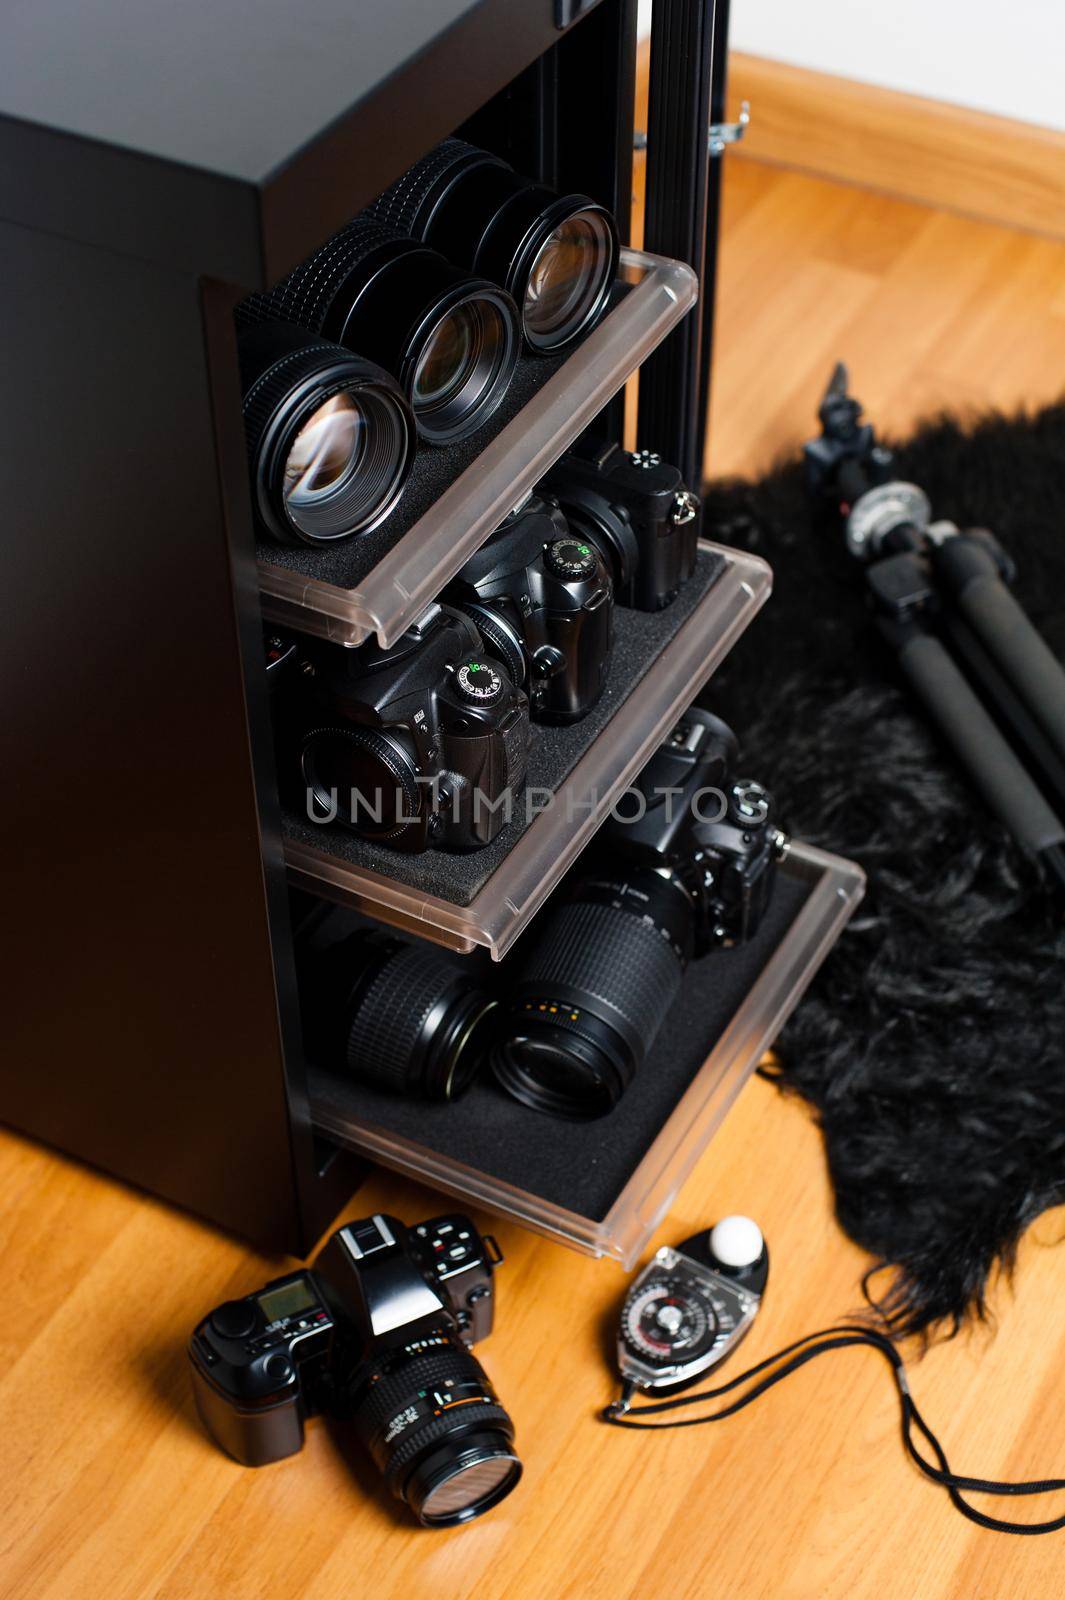 electronic dehumidify dry cabinet for storage cameras lens and other photography equipment. Shallow depth of field, closeup at equipment inside the cabinet.